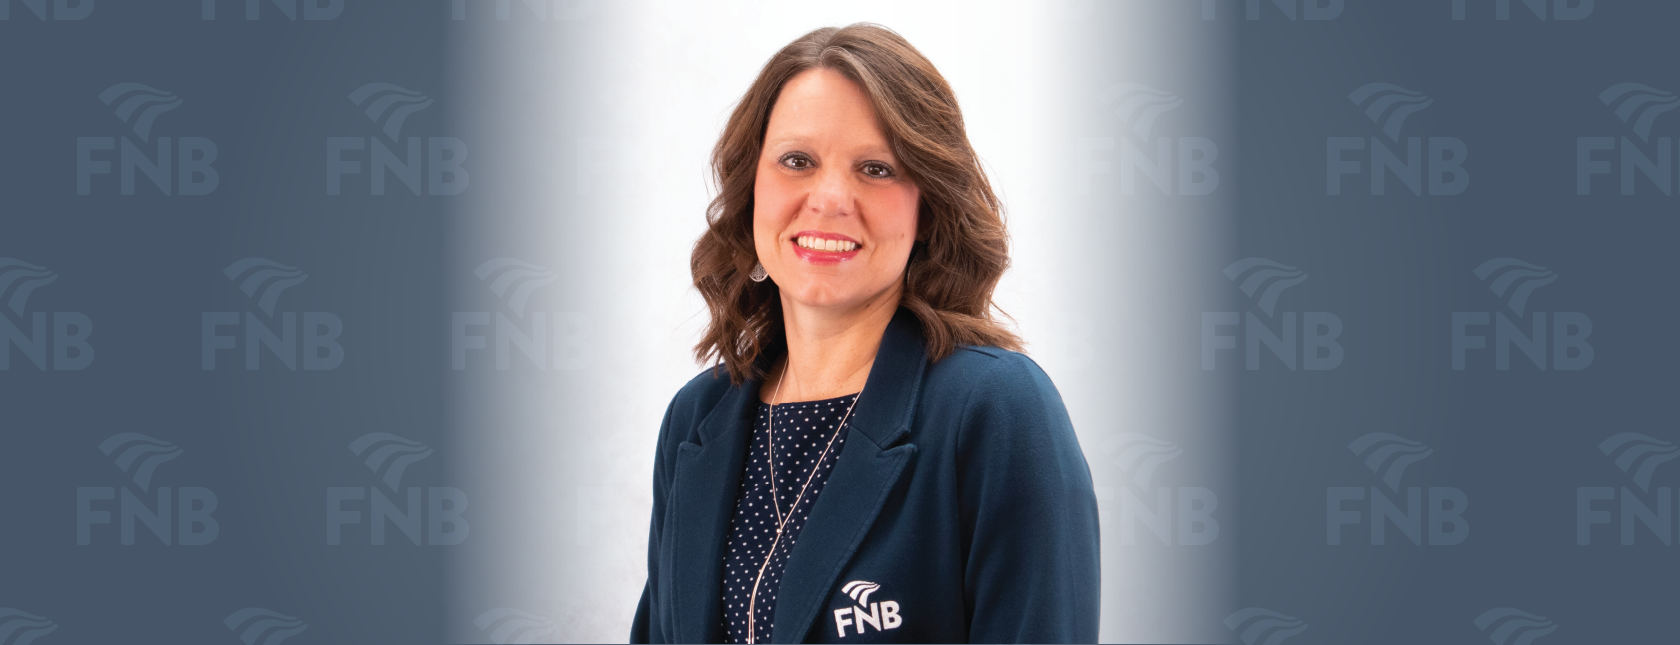 FNB's Jennifer Galloway Nominated for Award of Excellence